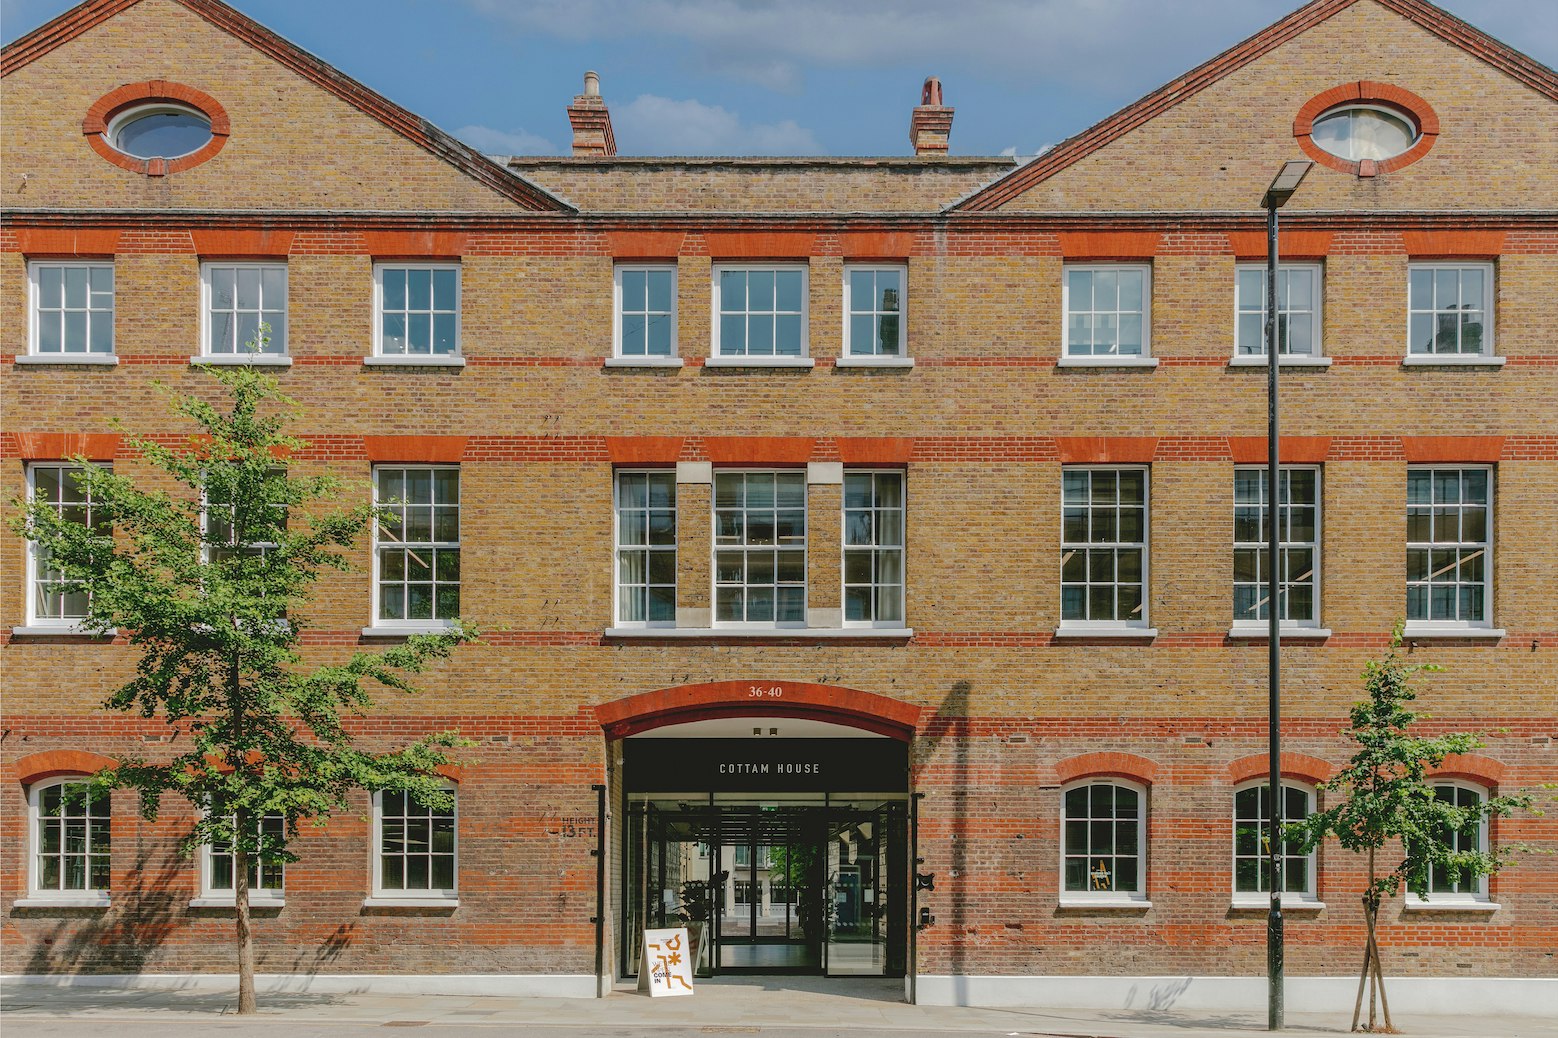 Conference Venues With Accommodation in London - The Mills Fabrica